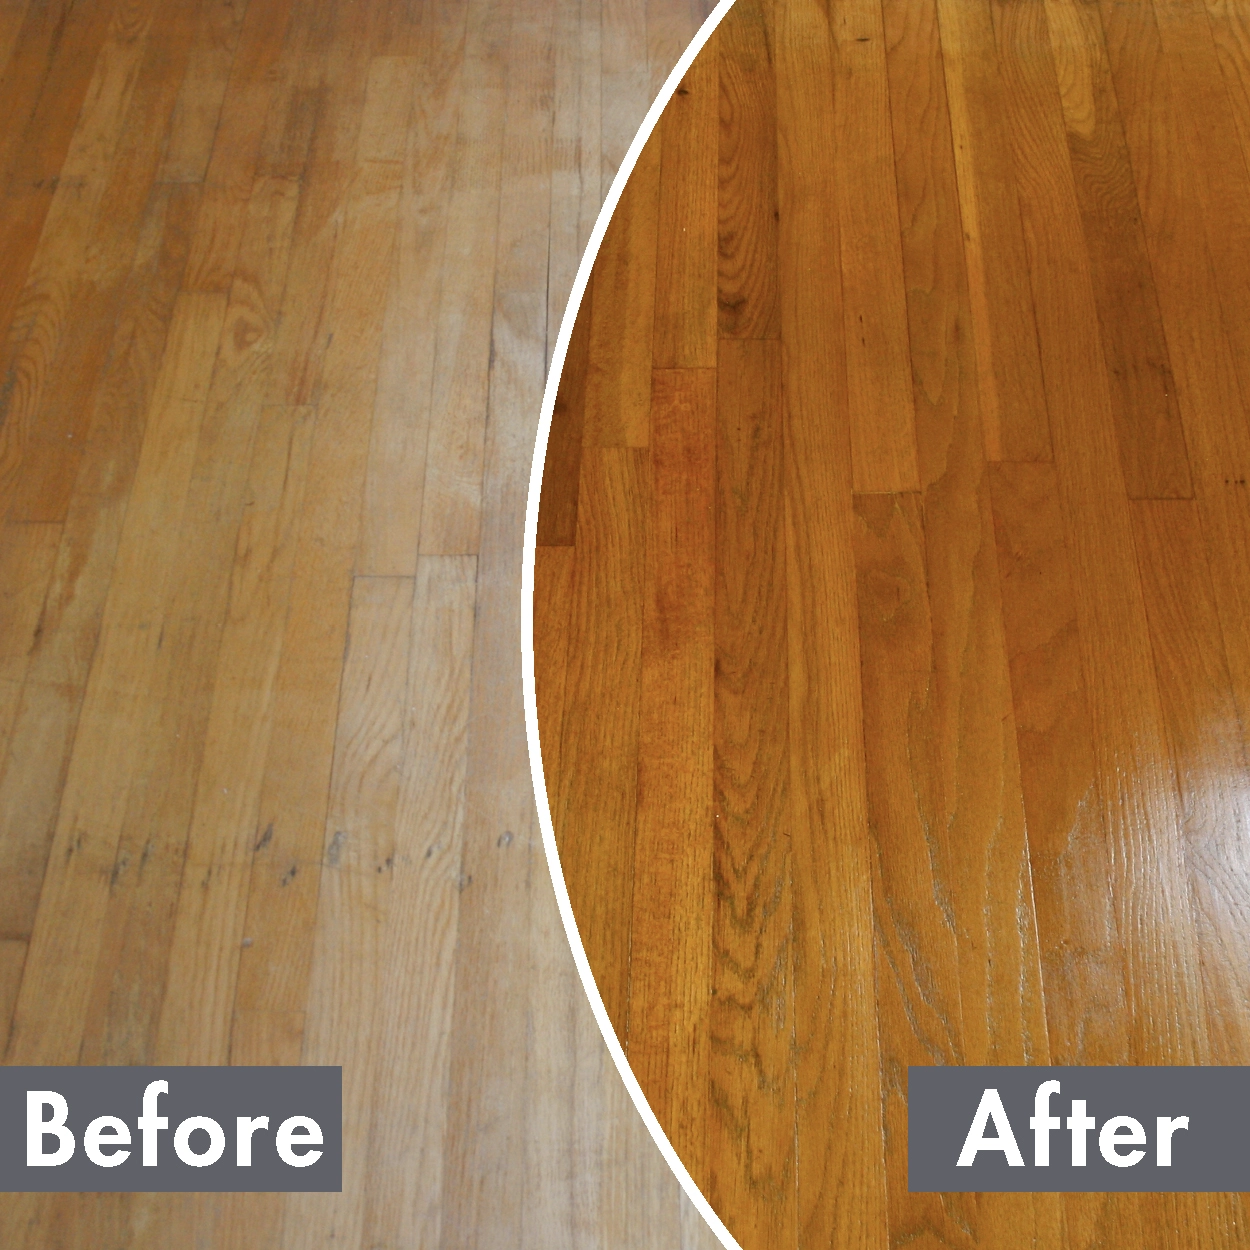 Wood Floor Refinishing Services N Hance, How To Clean And Refinish Hardwood Floors